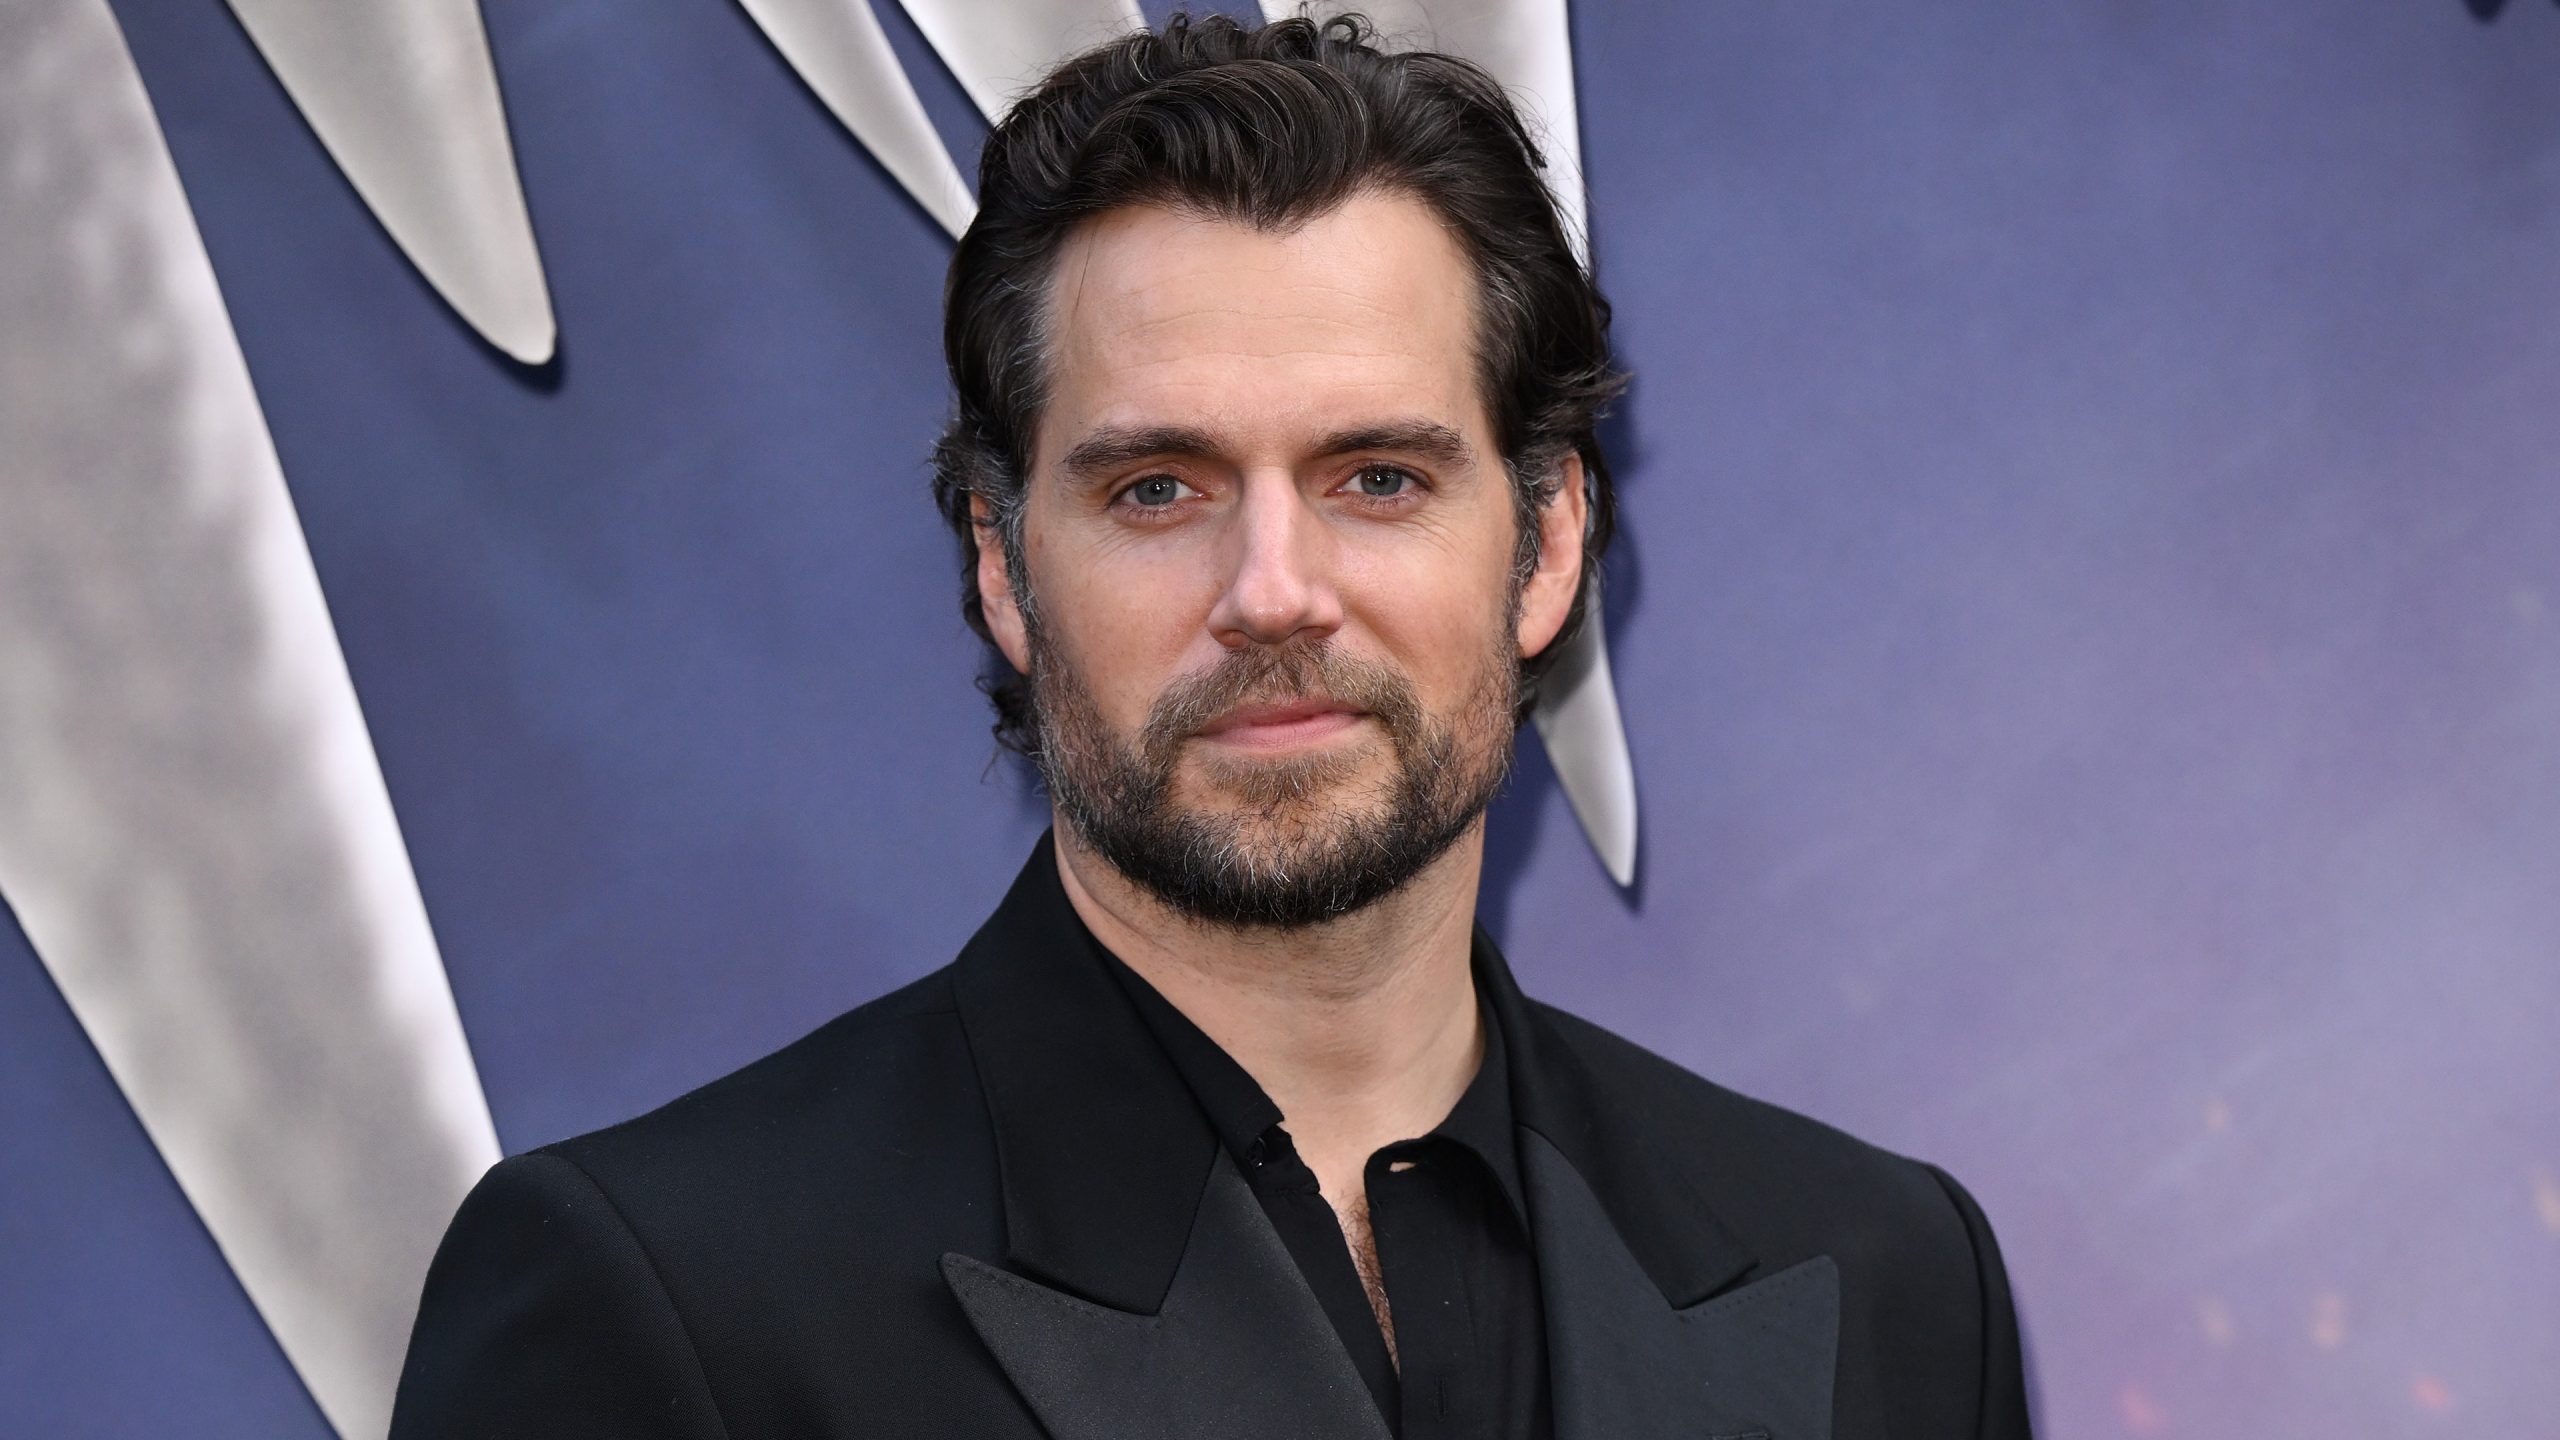 Henry Cavill’s Warhammer 40,000 cinematic universe is now ‘properly rolling’ as Games Workshop finalizes deal with Amazon Studios